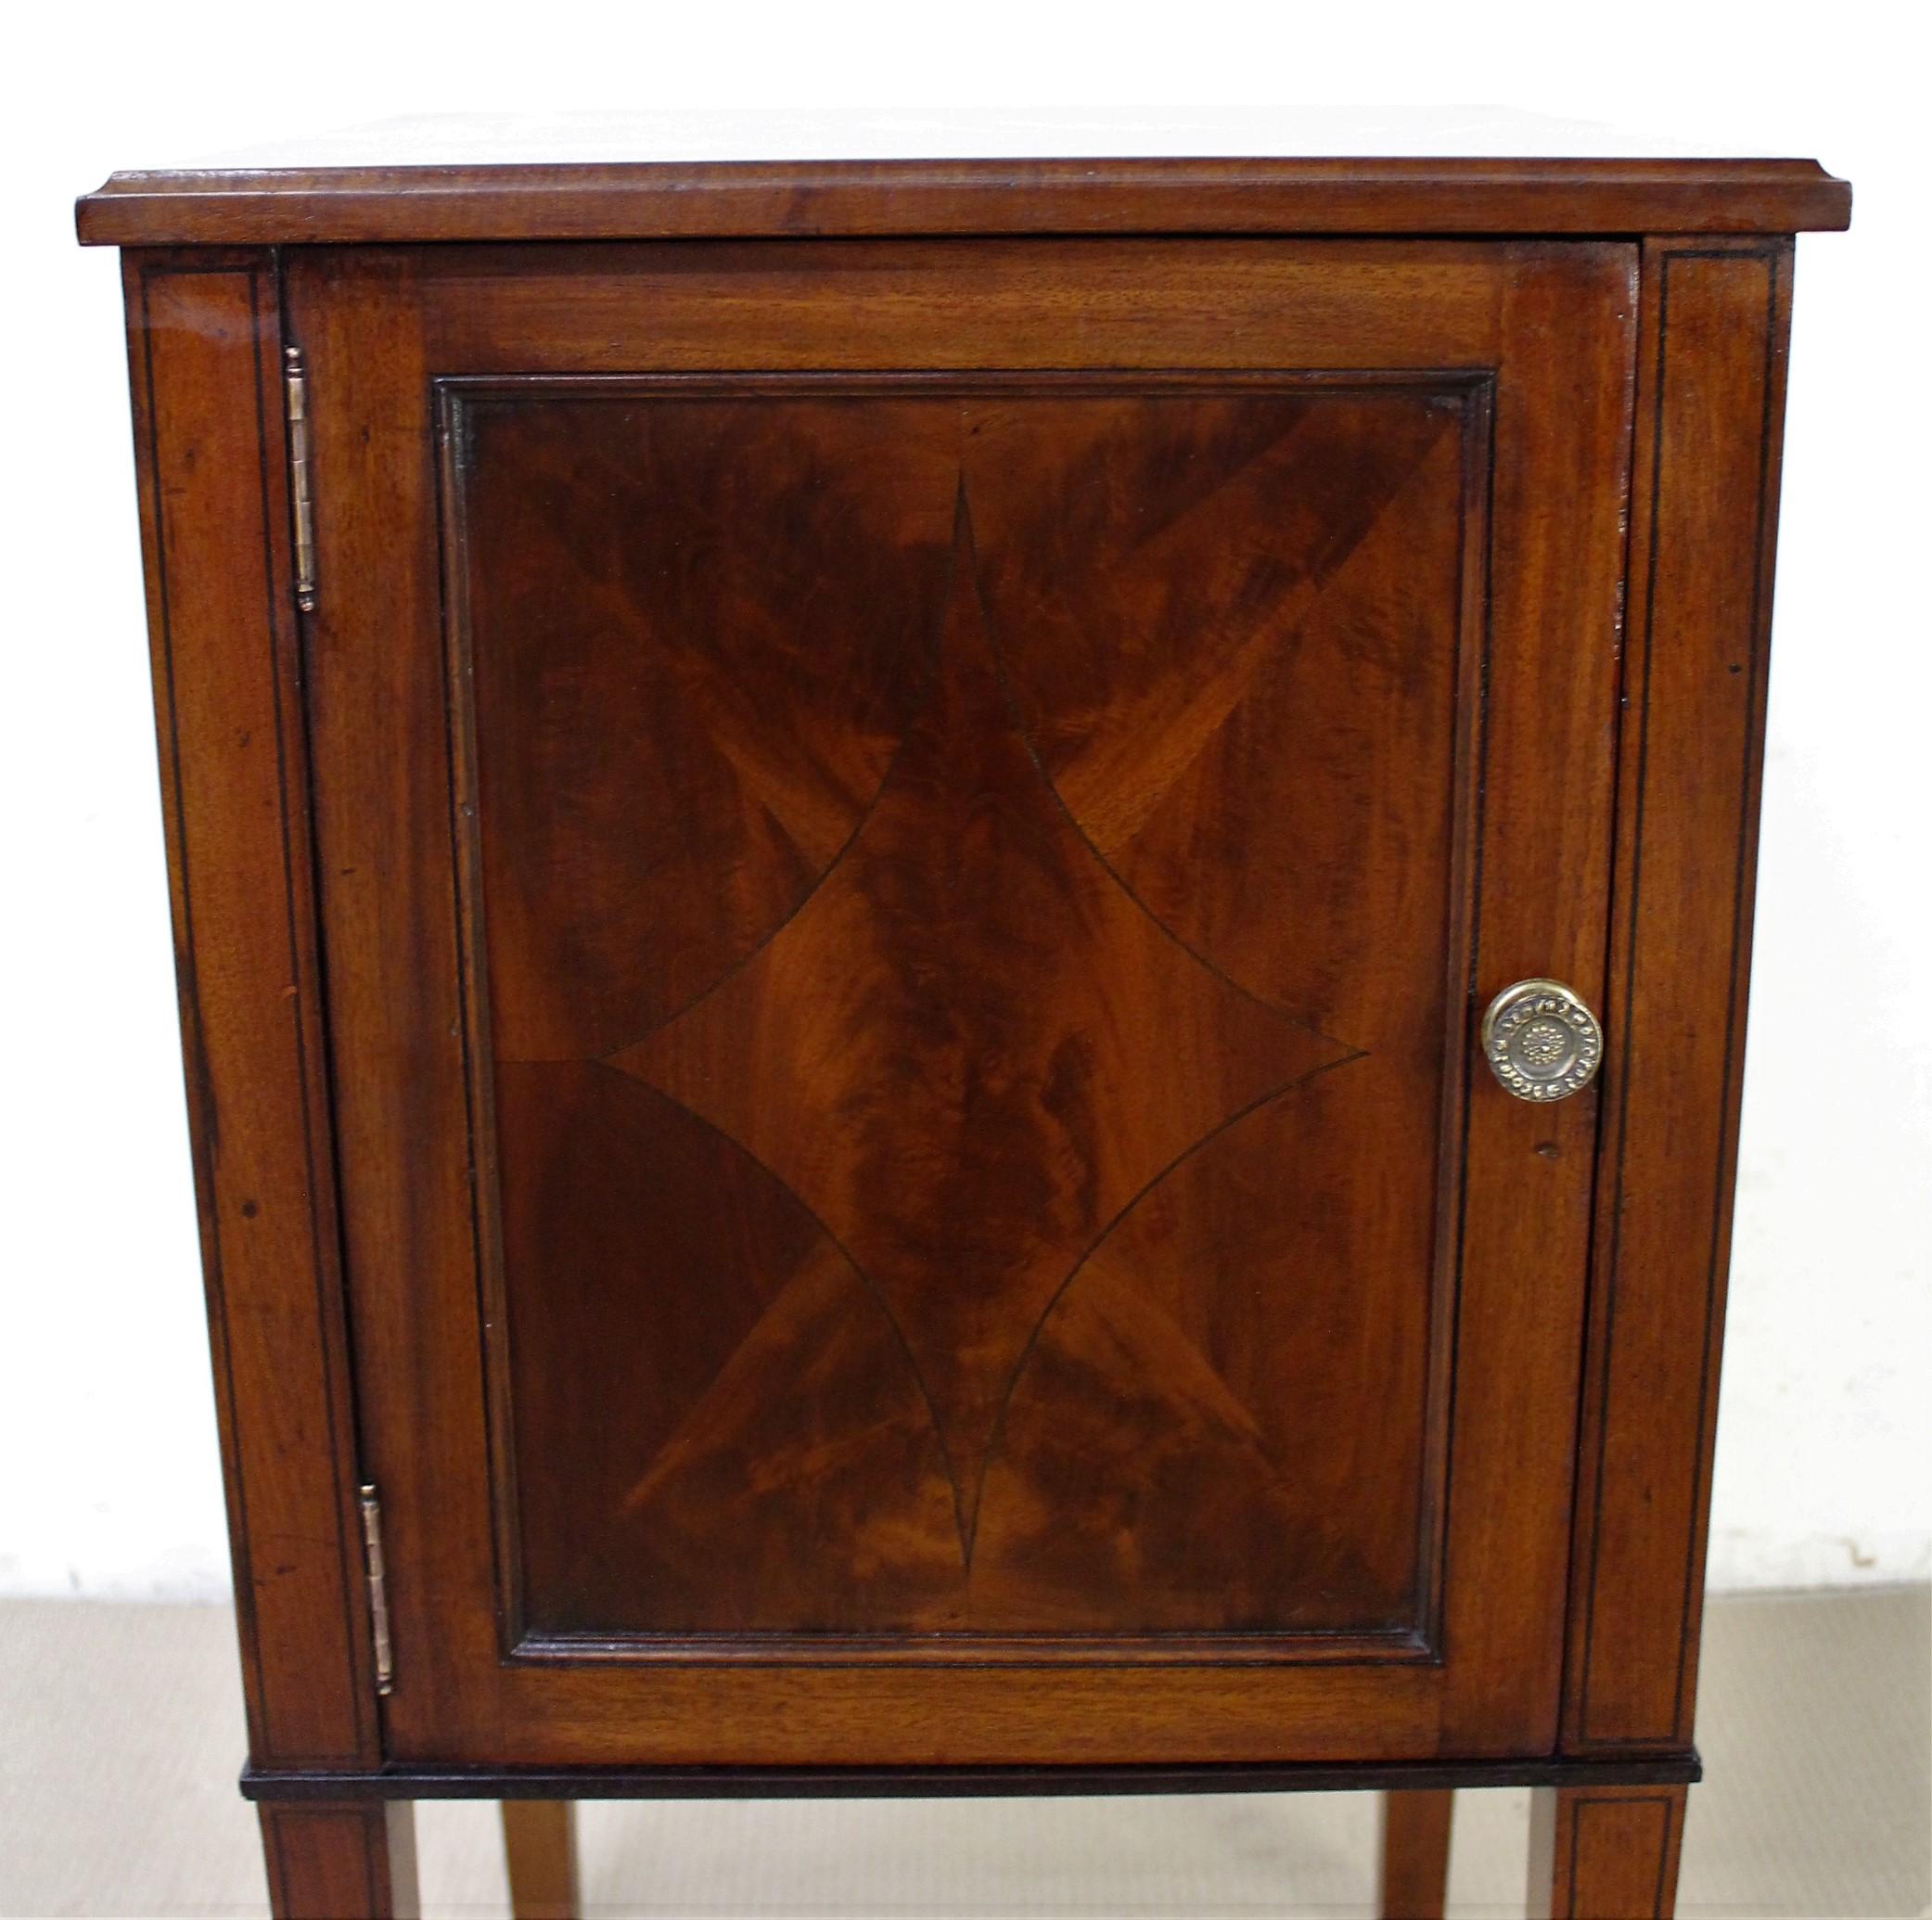 A lovely pair of Edwardian period inlaid mahogany bedside cupboards. Each with a single opening door, fitted with their original brass handles, which open to access shelved interiors. Decorated with inlaid stringing in ebony and with a decorative